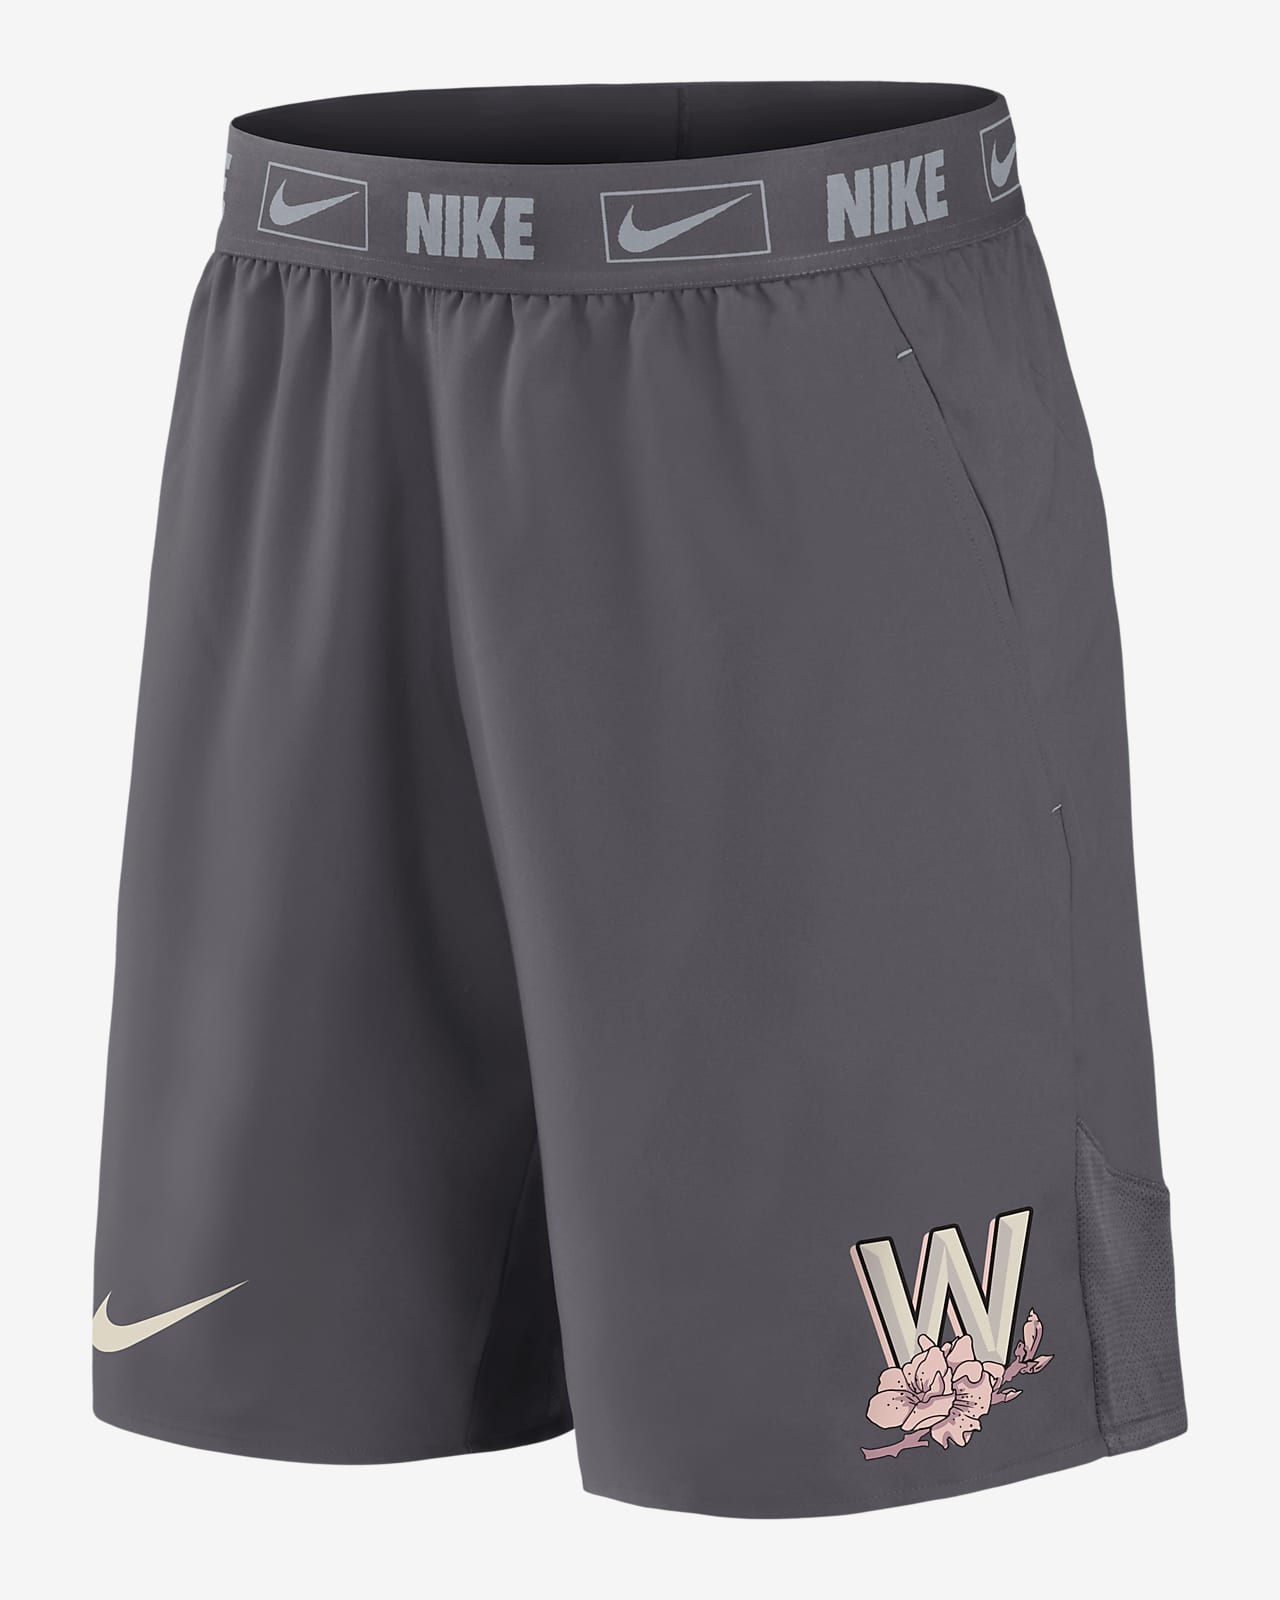 nationals nike city